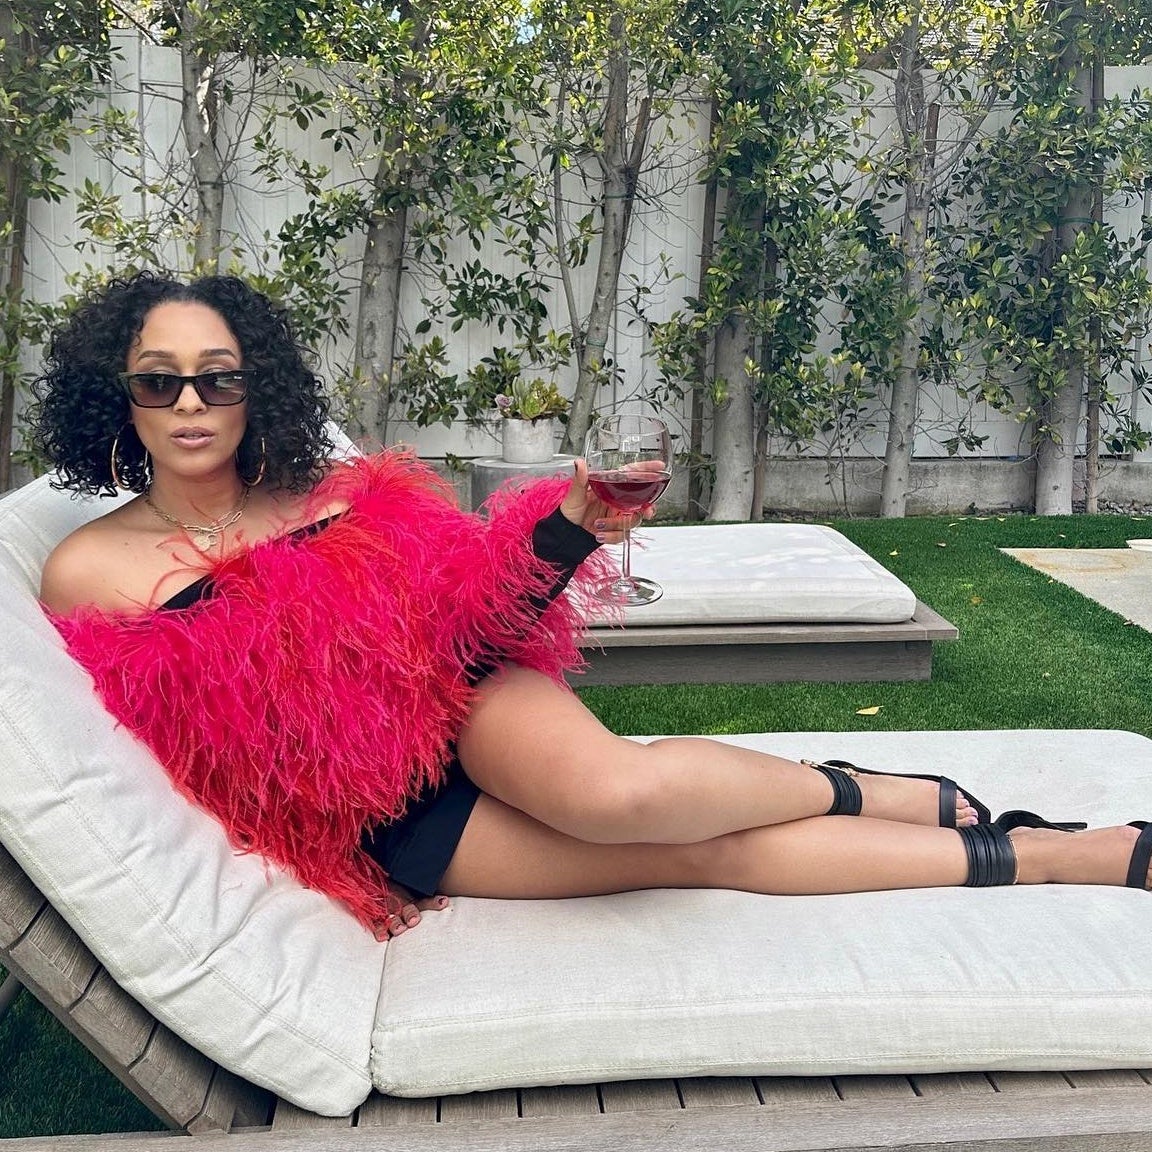 ‘This Is My Choosing Me Era!’: 8 Times Tia Mowry Showed How Self-Care Is Important To Her On Social Media